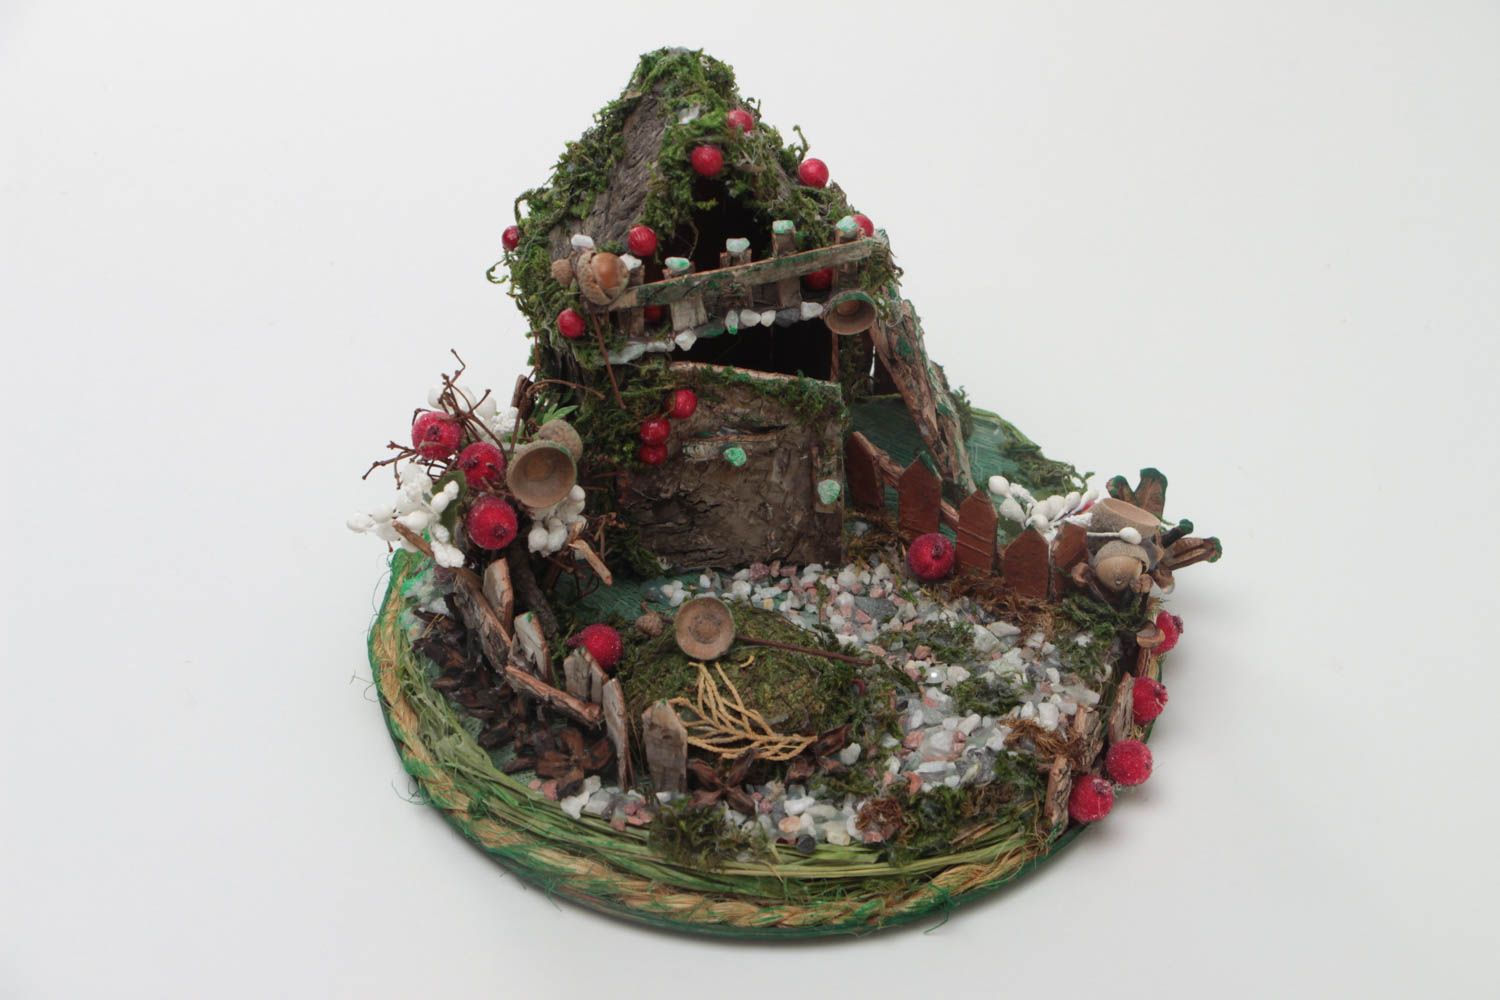 Decorative house for home made of natural materials little beautiful fairy tale photo 2